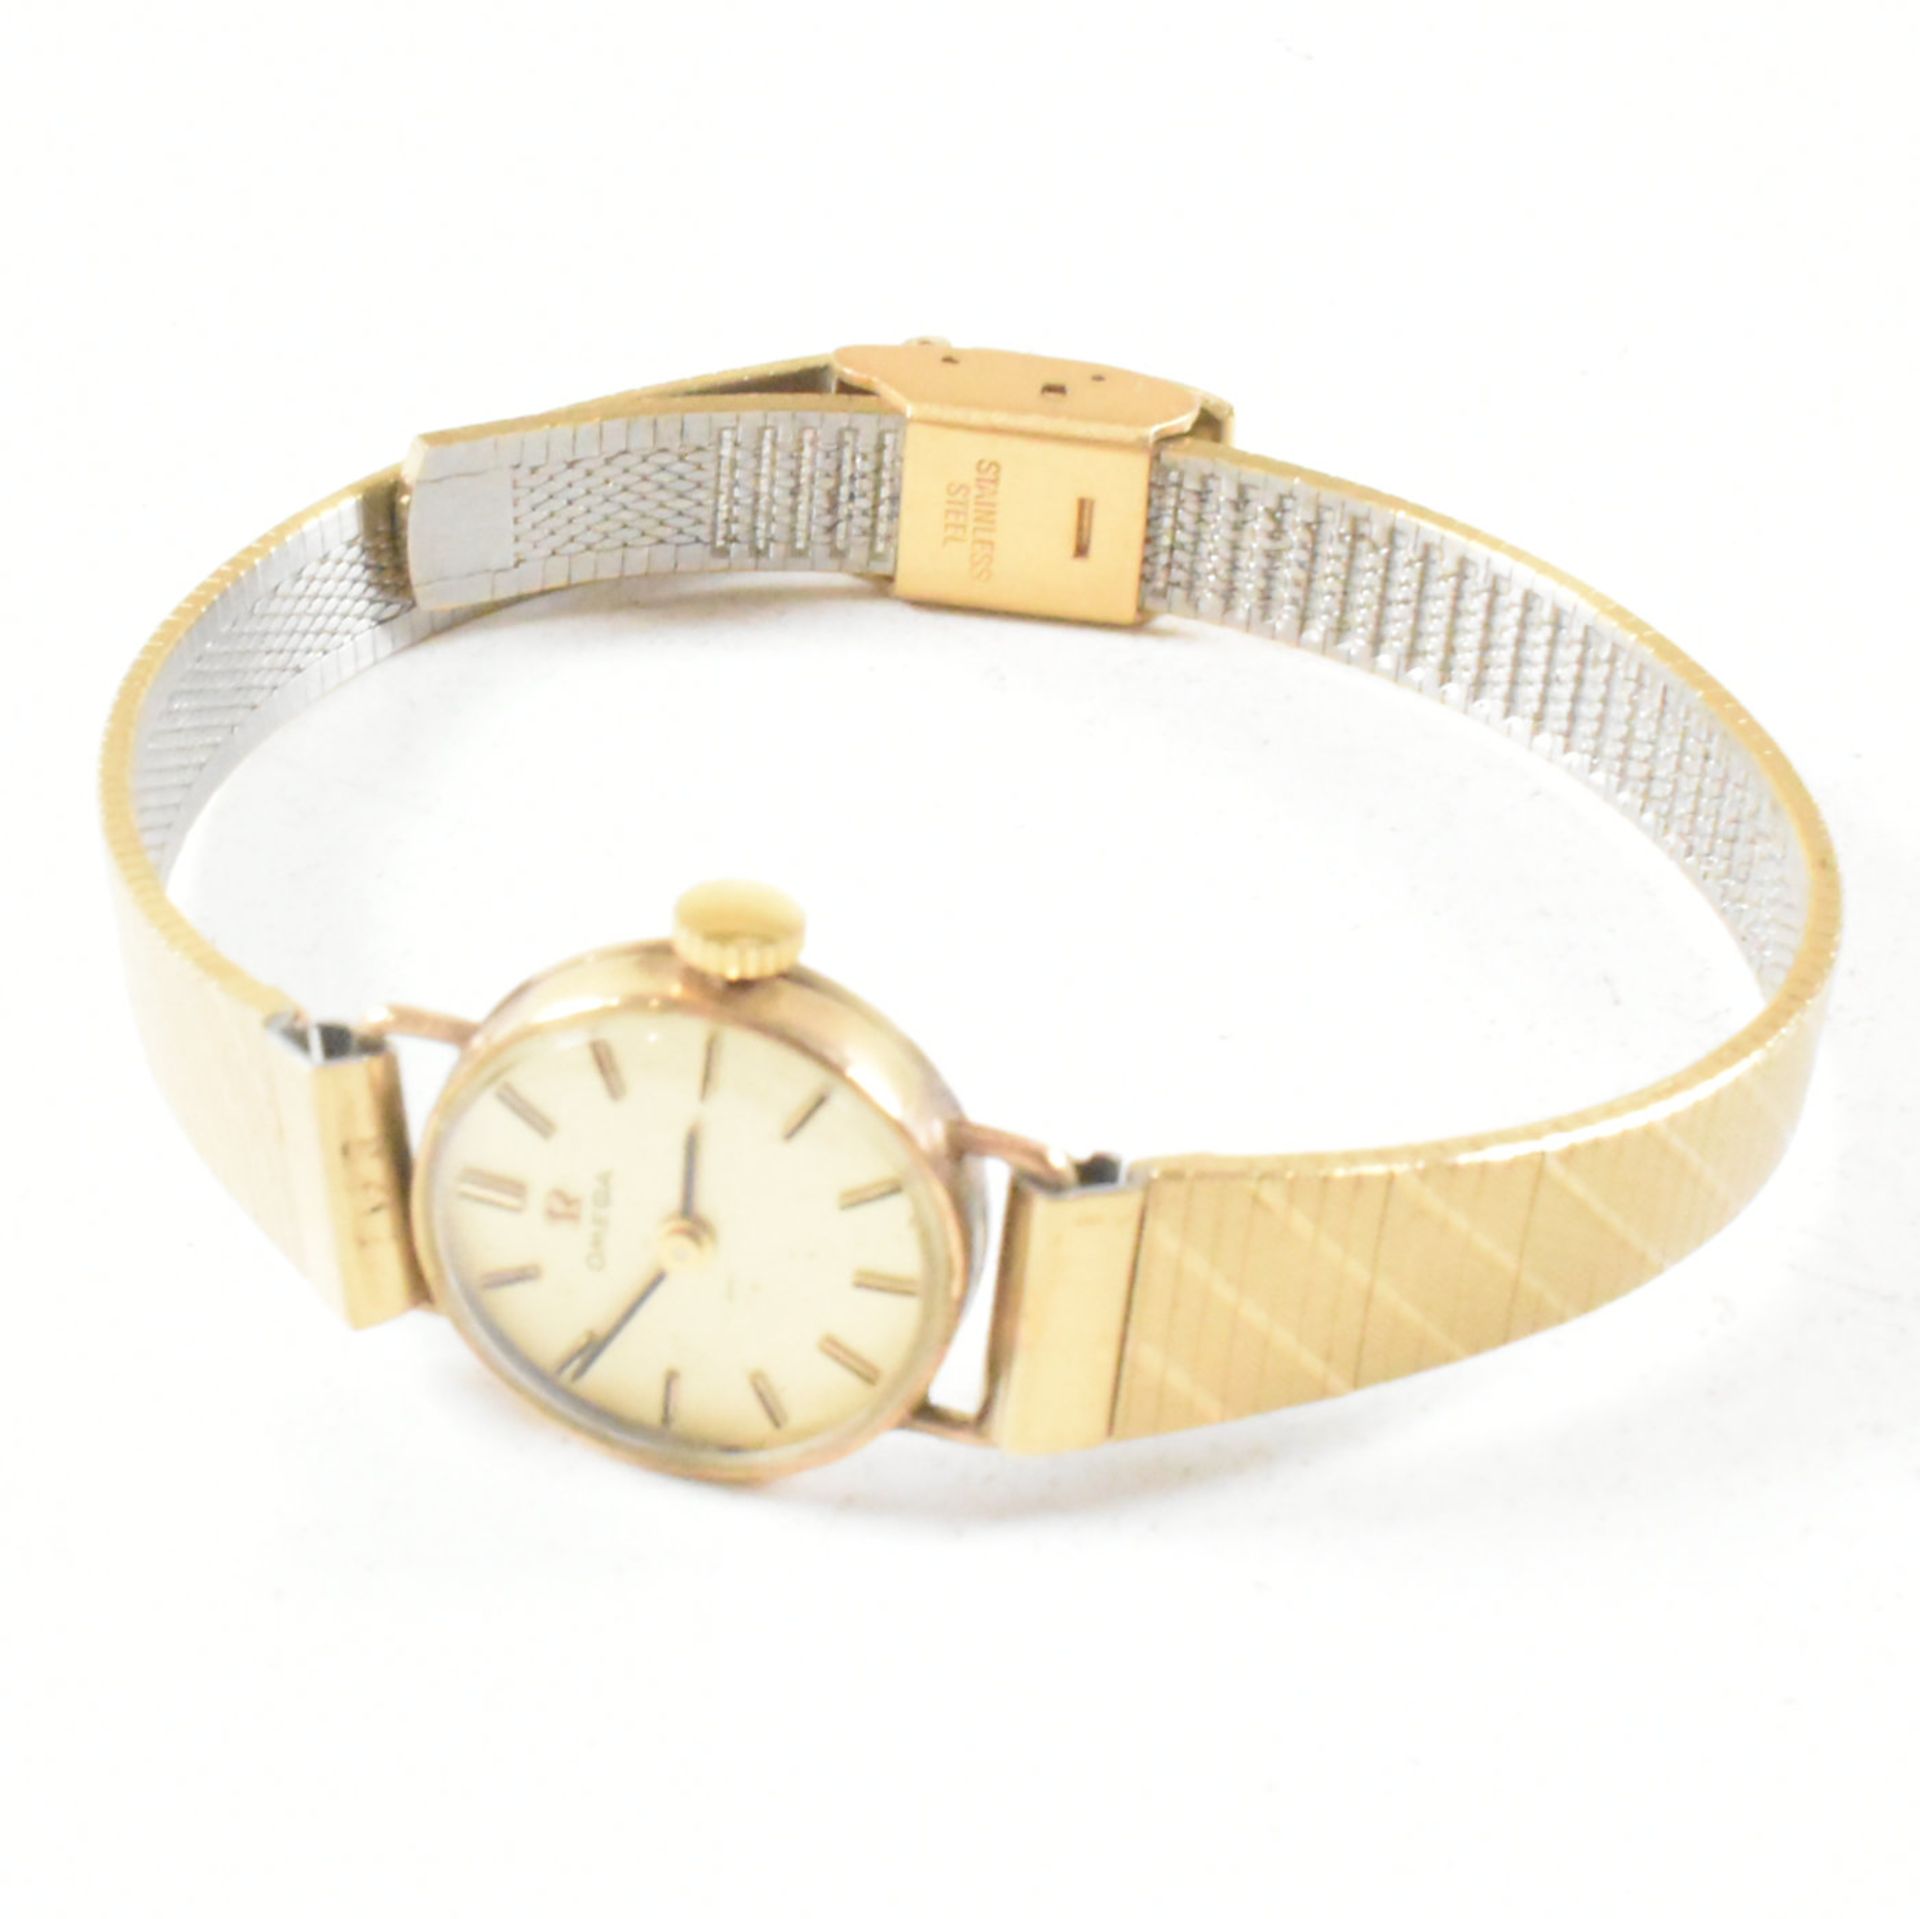 OMEGA HALLMARKED 9CT GOLD & STAINLESS STEEL COCKTAIL WATCH - Image 8 of 8